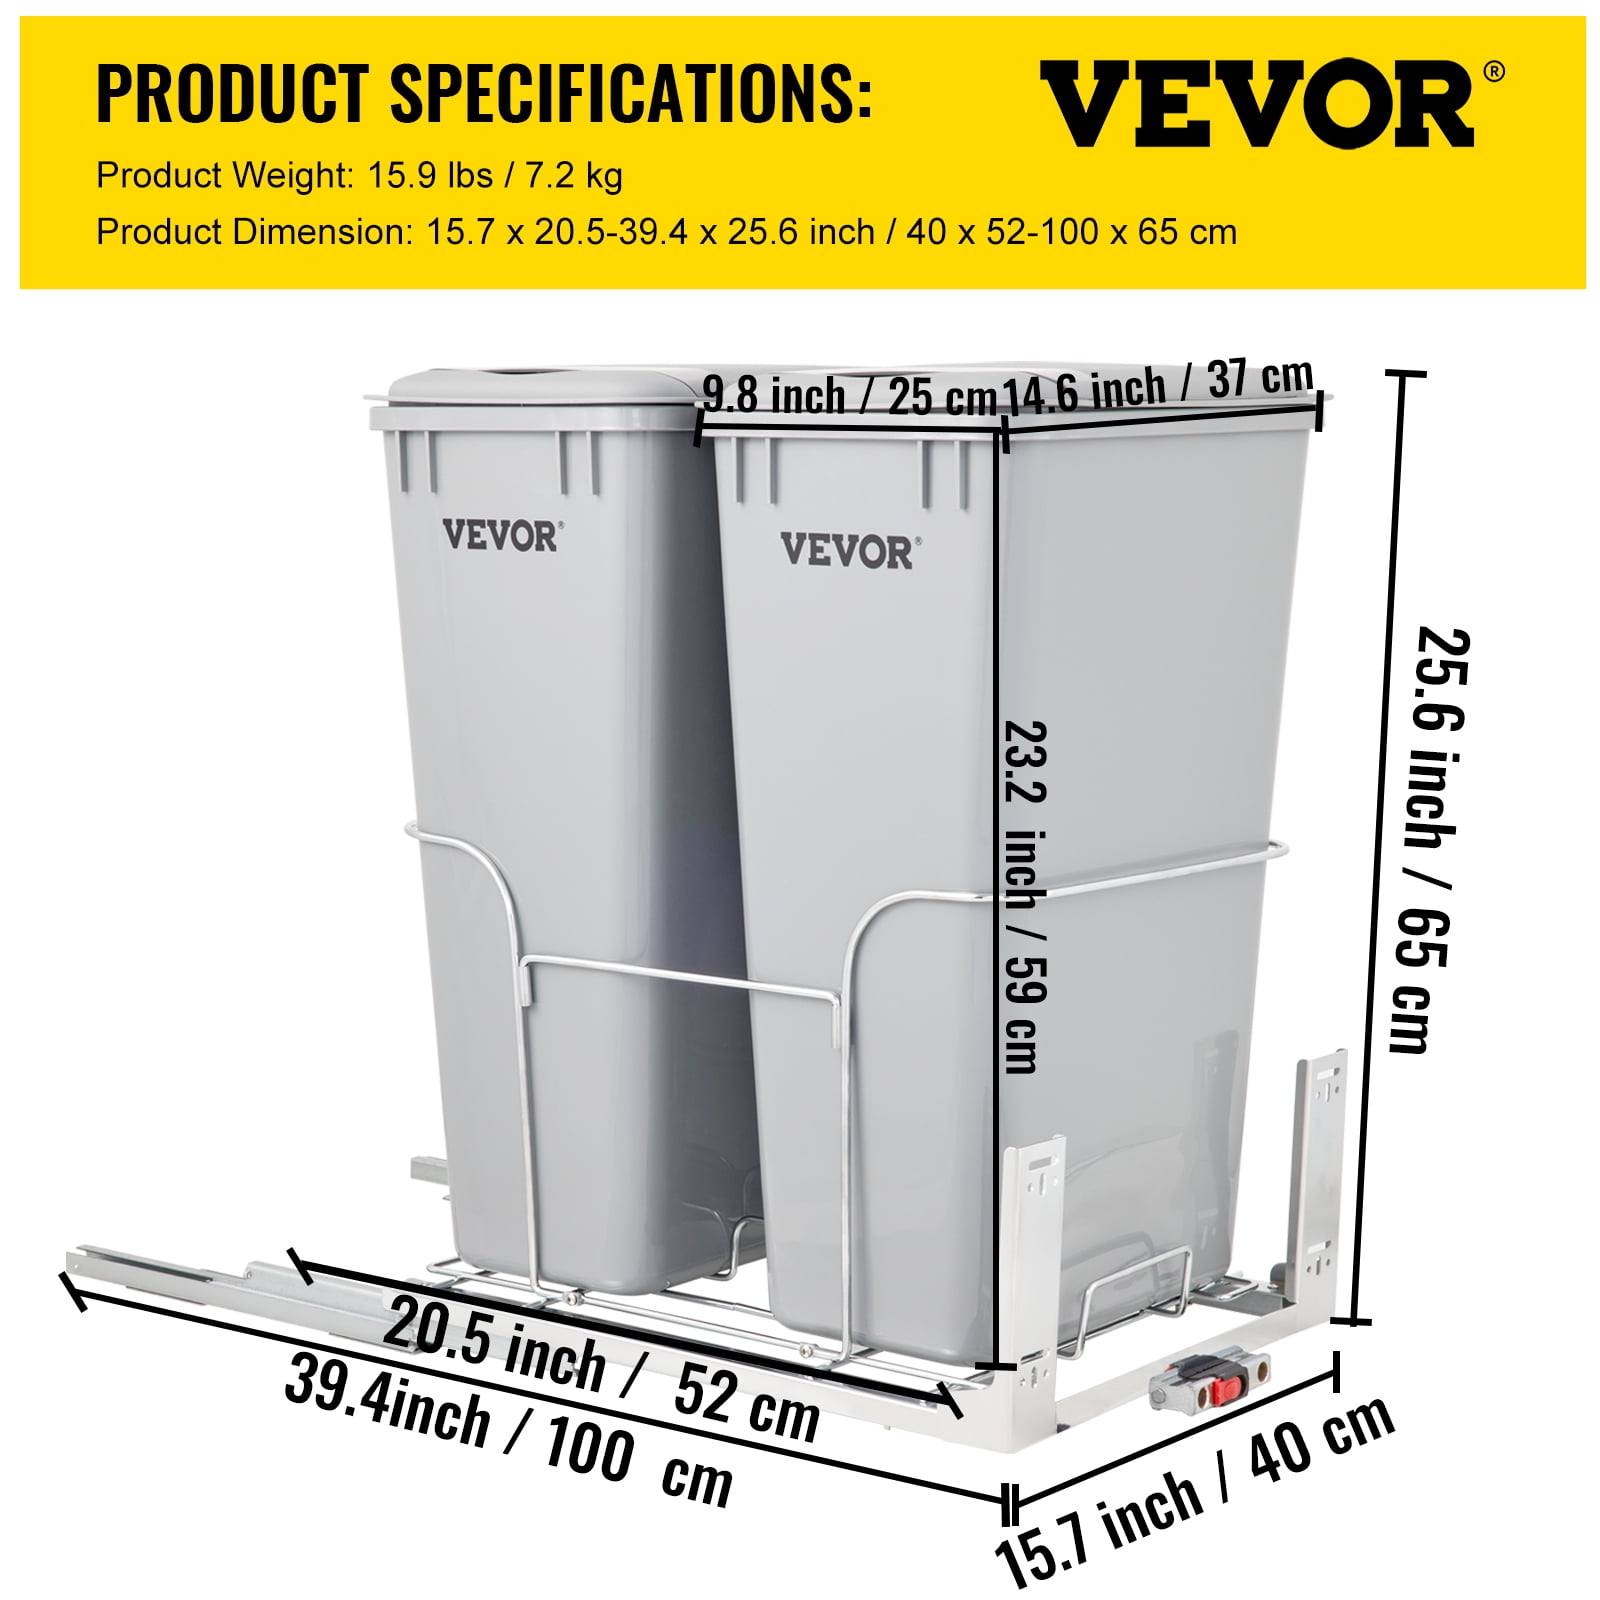 VEVOR 9 Gal. Pull-Out Trash Can 44 lbs. Load Capacity 2 Bins Under